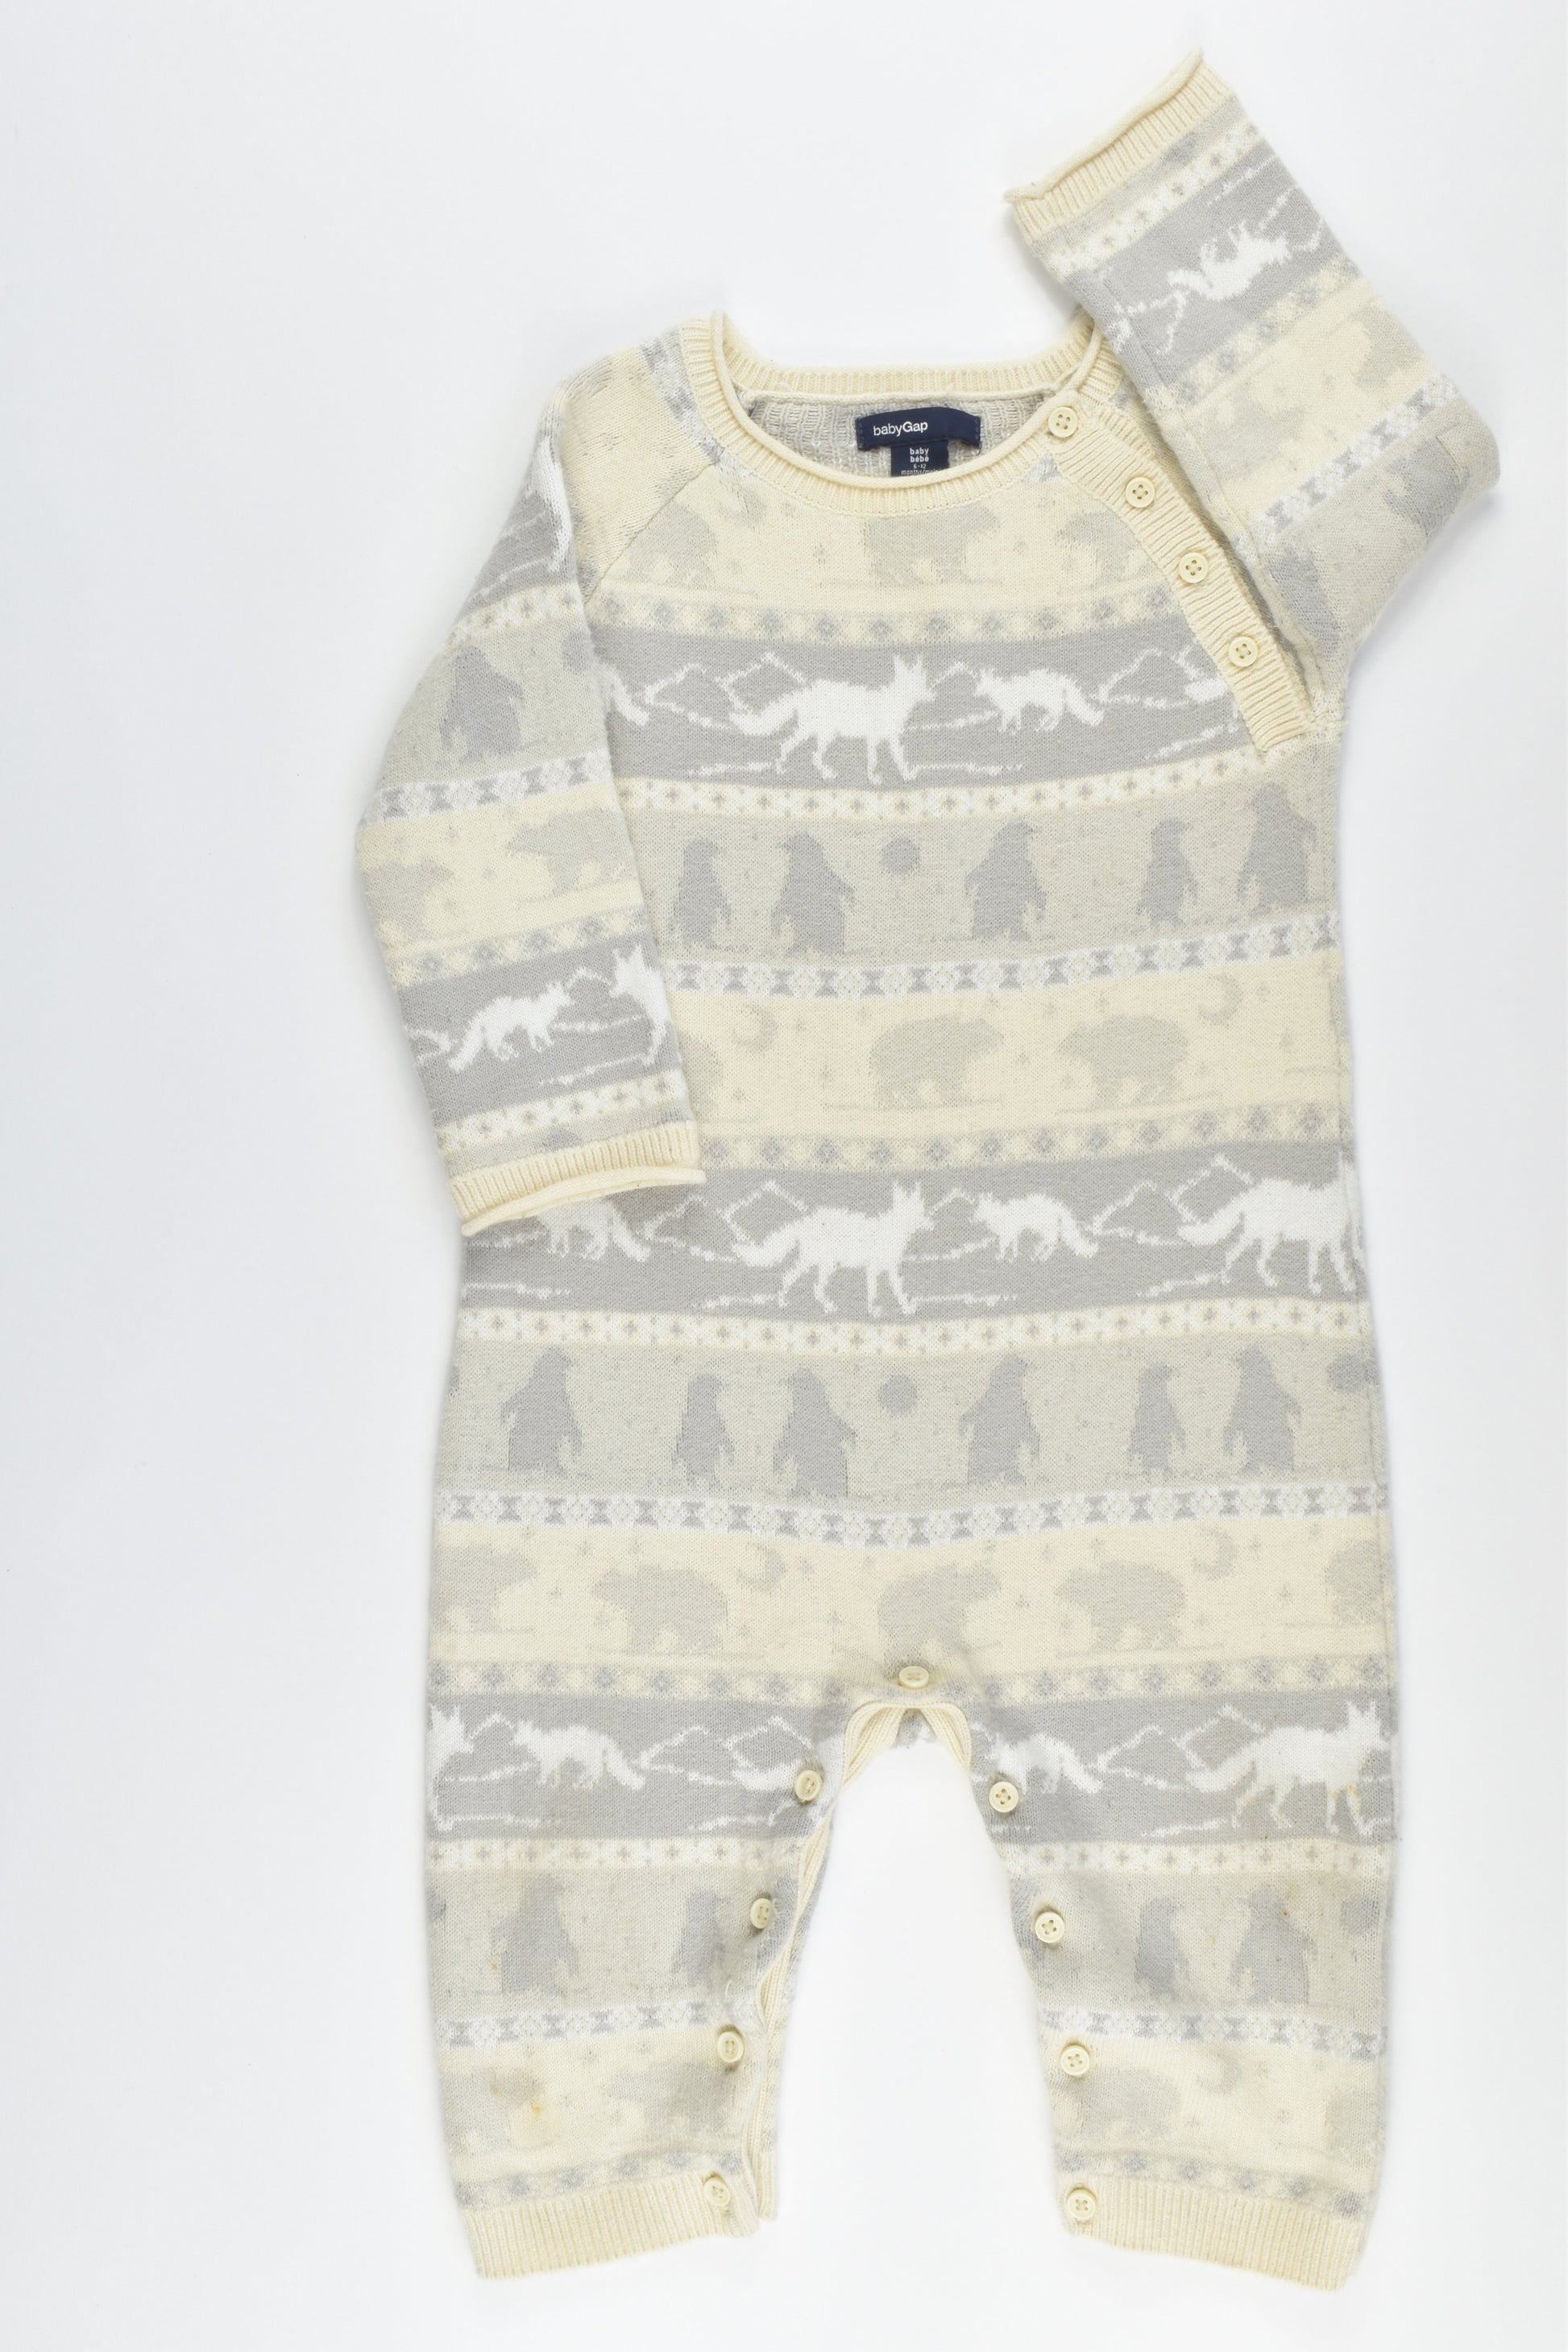 Baby Gap Size 0 (6-12 months) Knitted romper